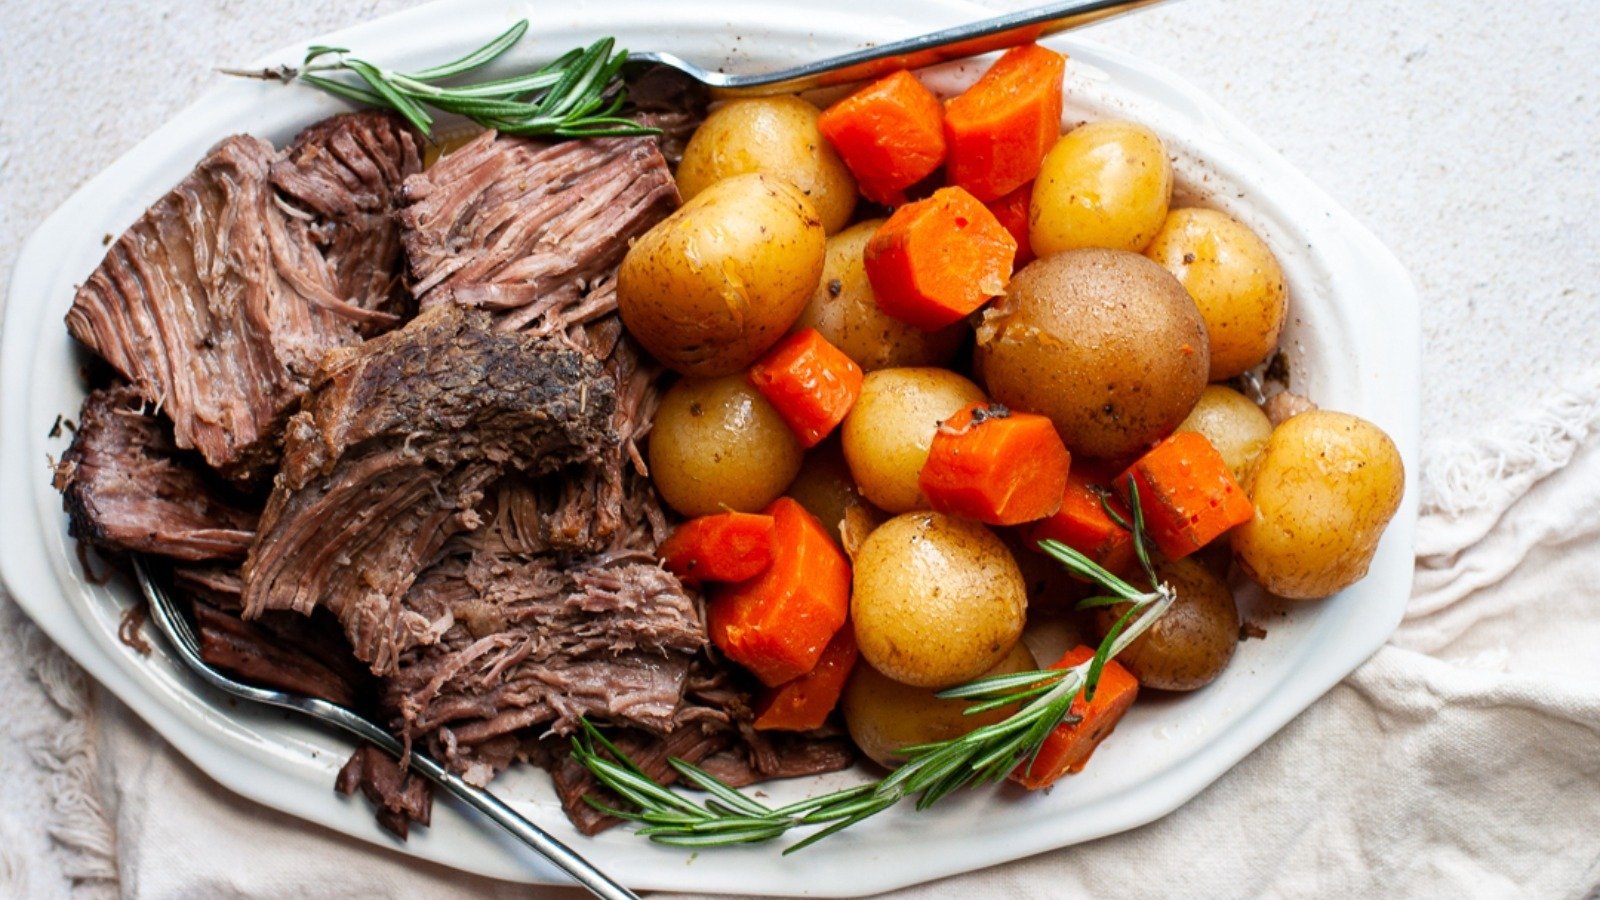 These Are The Most Flavorful Cuts Of Beef To Have In The Slow Cooker - cover